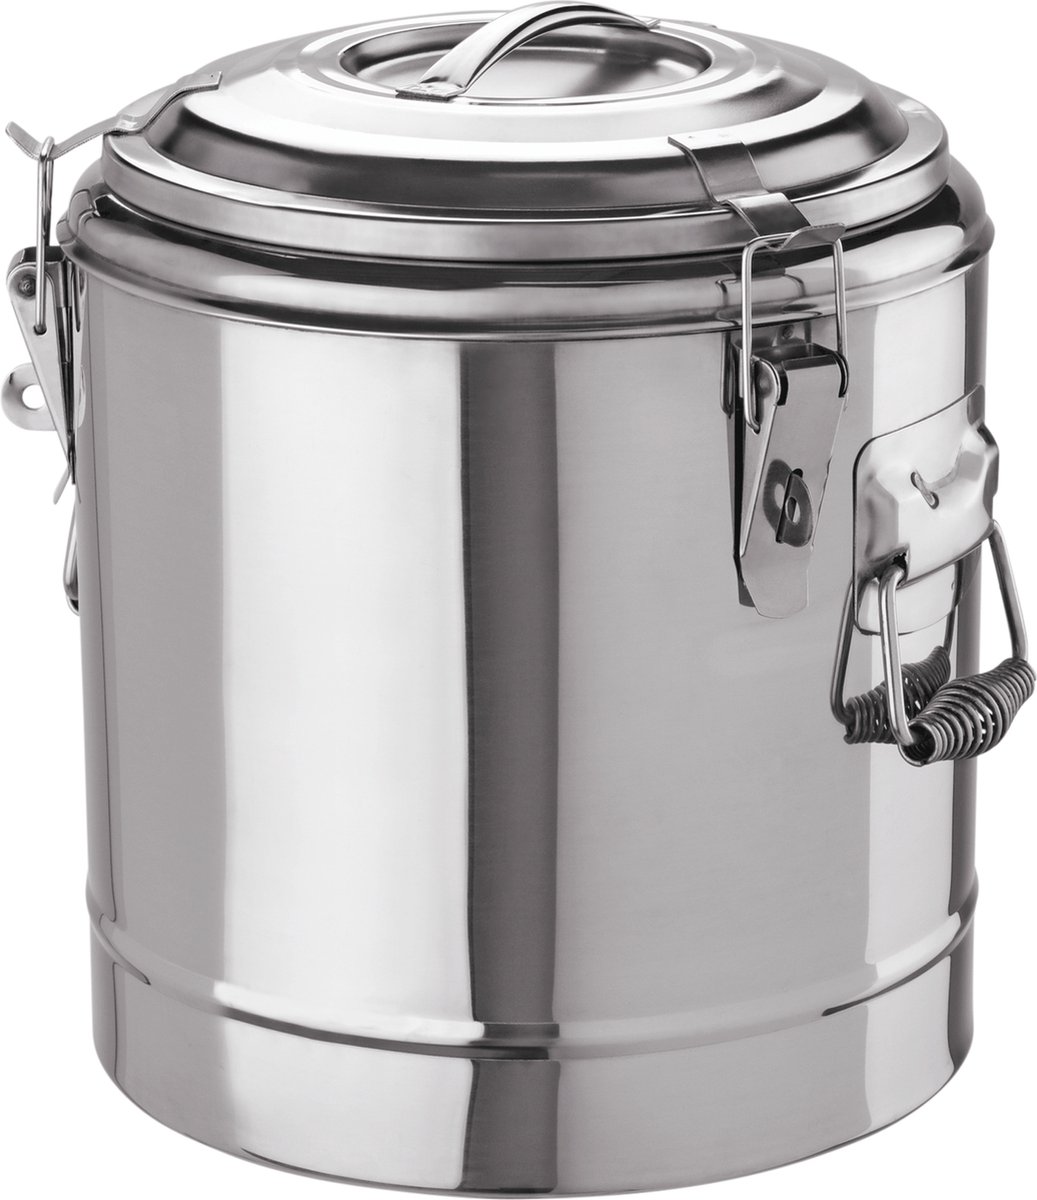 Thermos container, transportcontainer - 22 L, 4.72 kg, chroomnikkelstaal